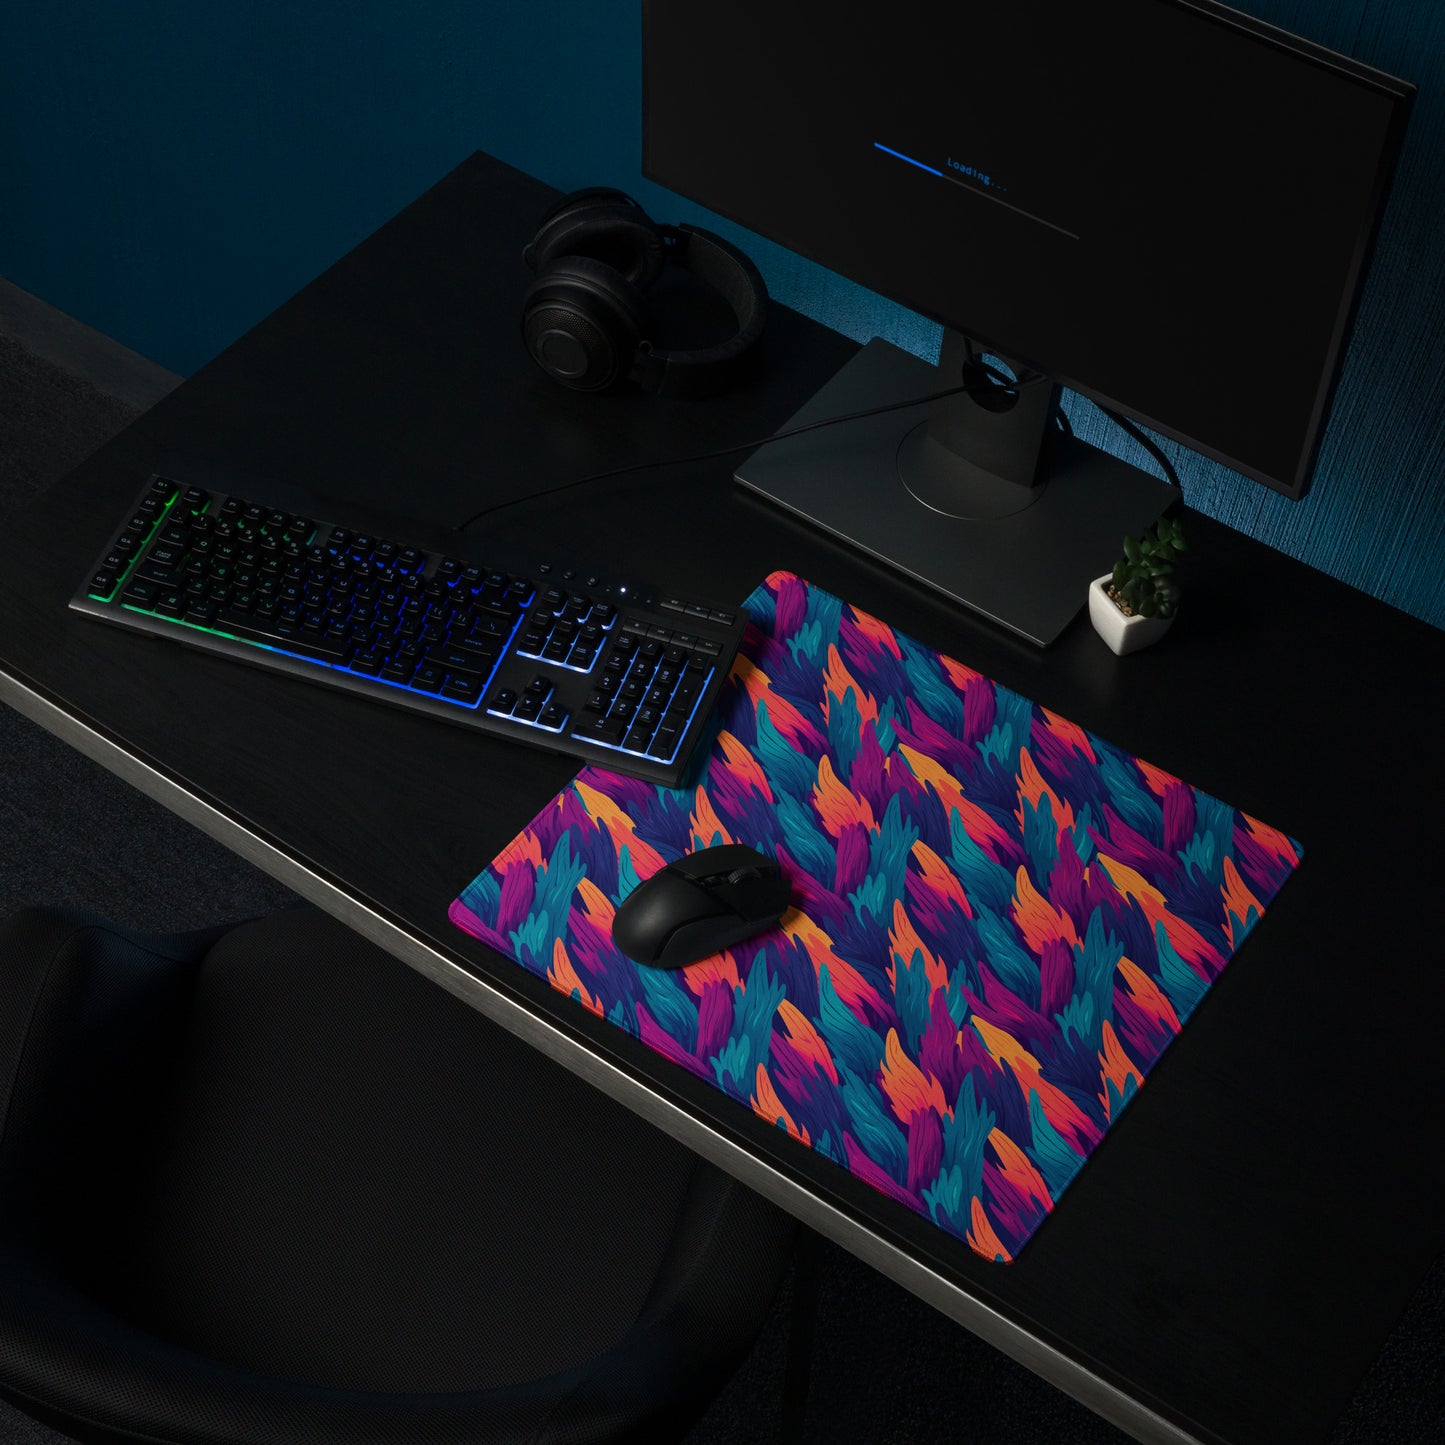 A 18" x 16" desk pad with a wavy flame pattern on it shown at a desk setup. Blue, Orange and Purple in color.